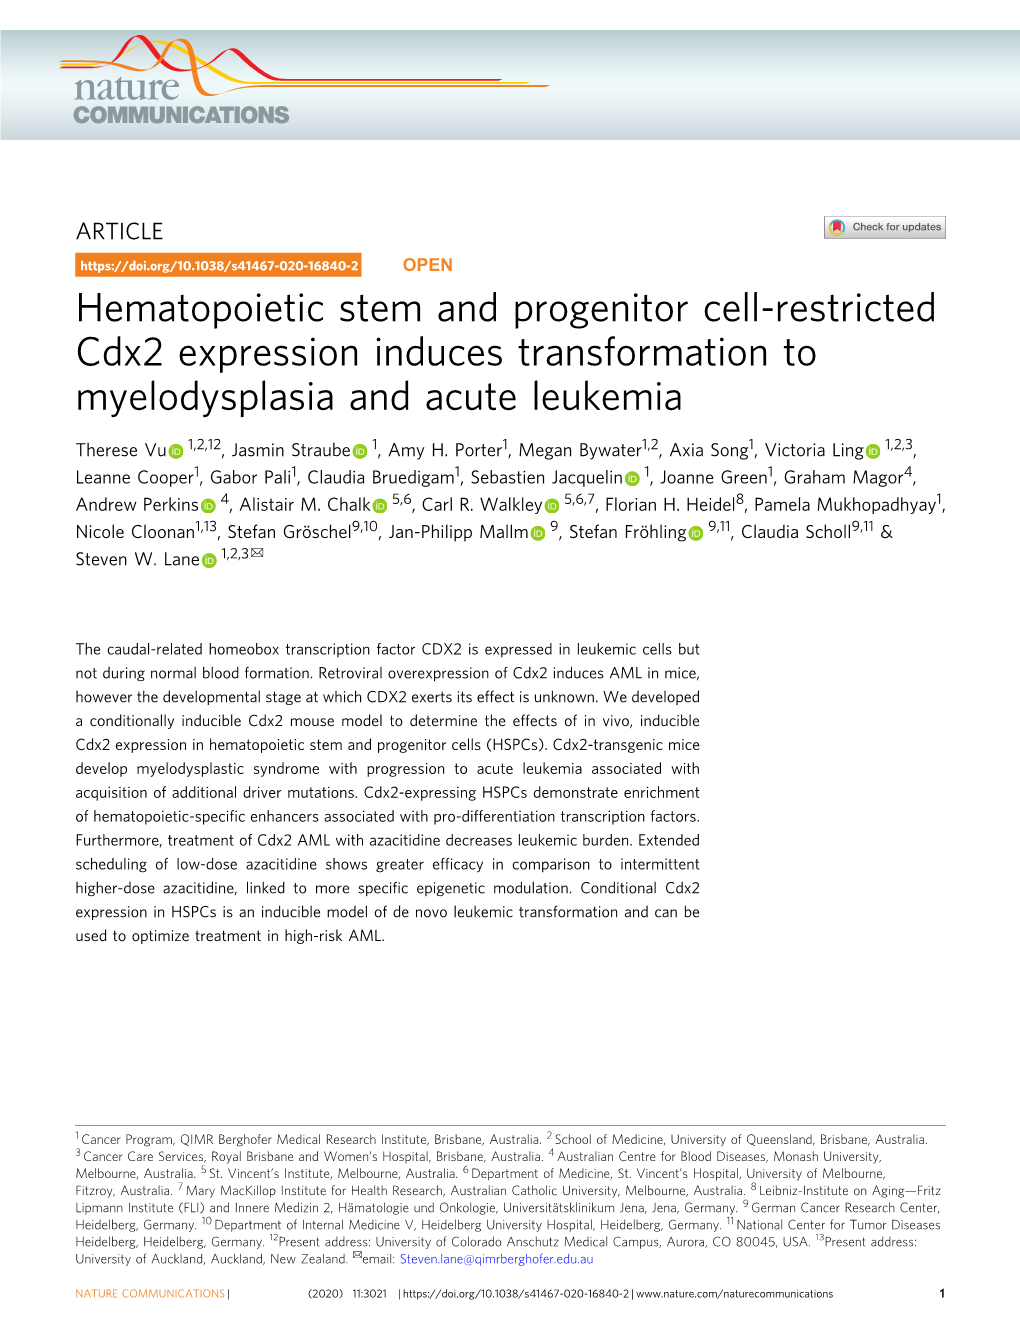 Hematopoietic Stem and Progenitor Cell-Restricted Cdx2 Expression Induces Transformation to Myelodysplasia and Acute Leukemia